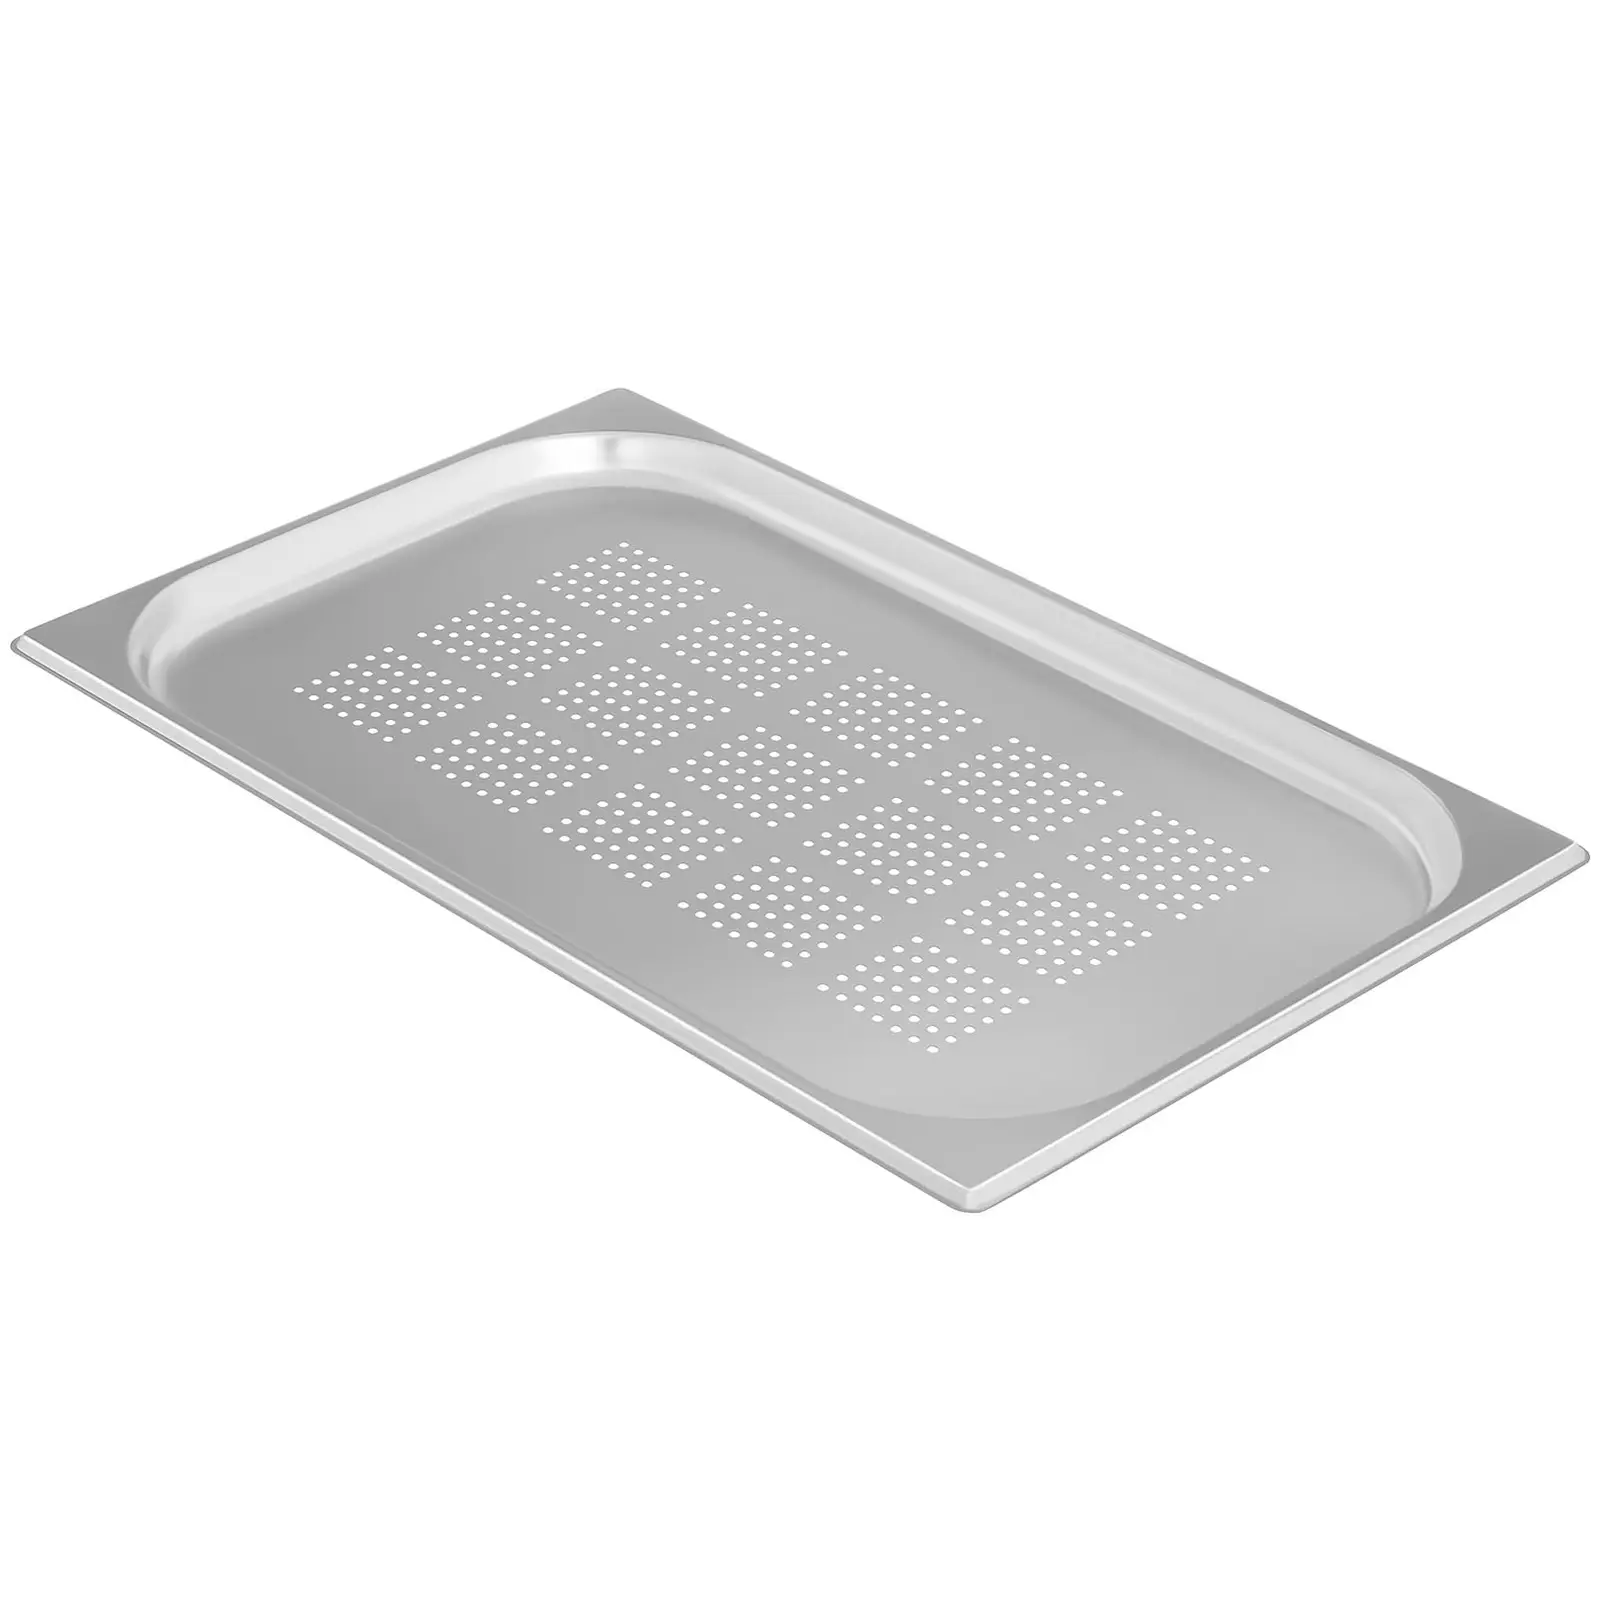 Gastronorm Tray - 1/1 - 20 mm - Perforated